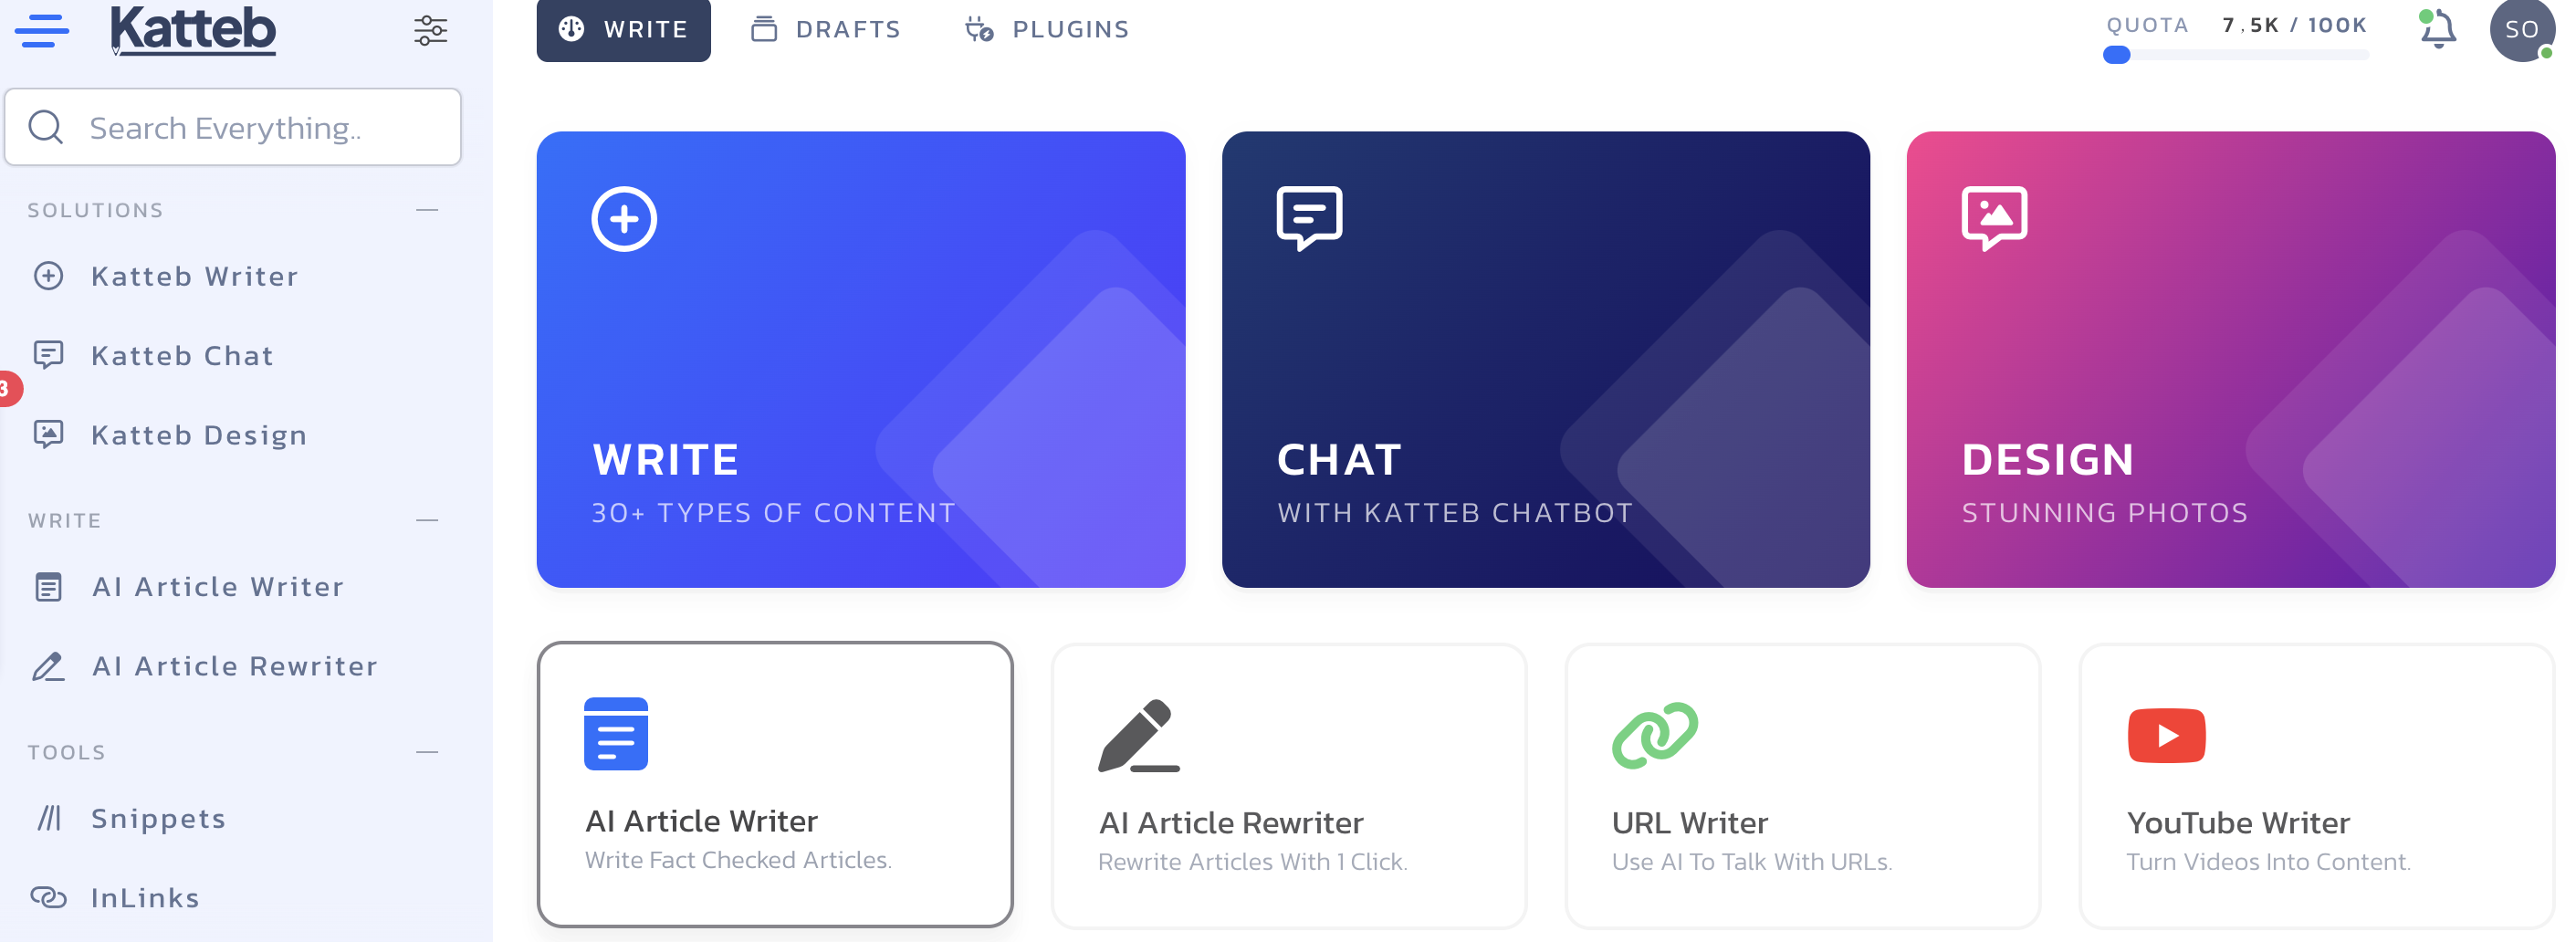 Katteb Review: Revolutionizing Content Writing with AI Fact-Checking